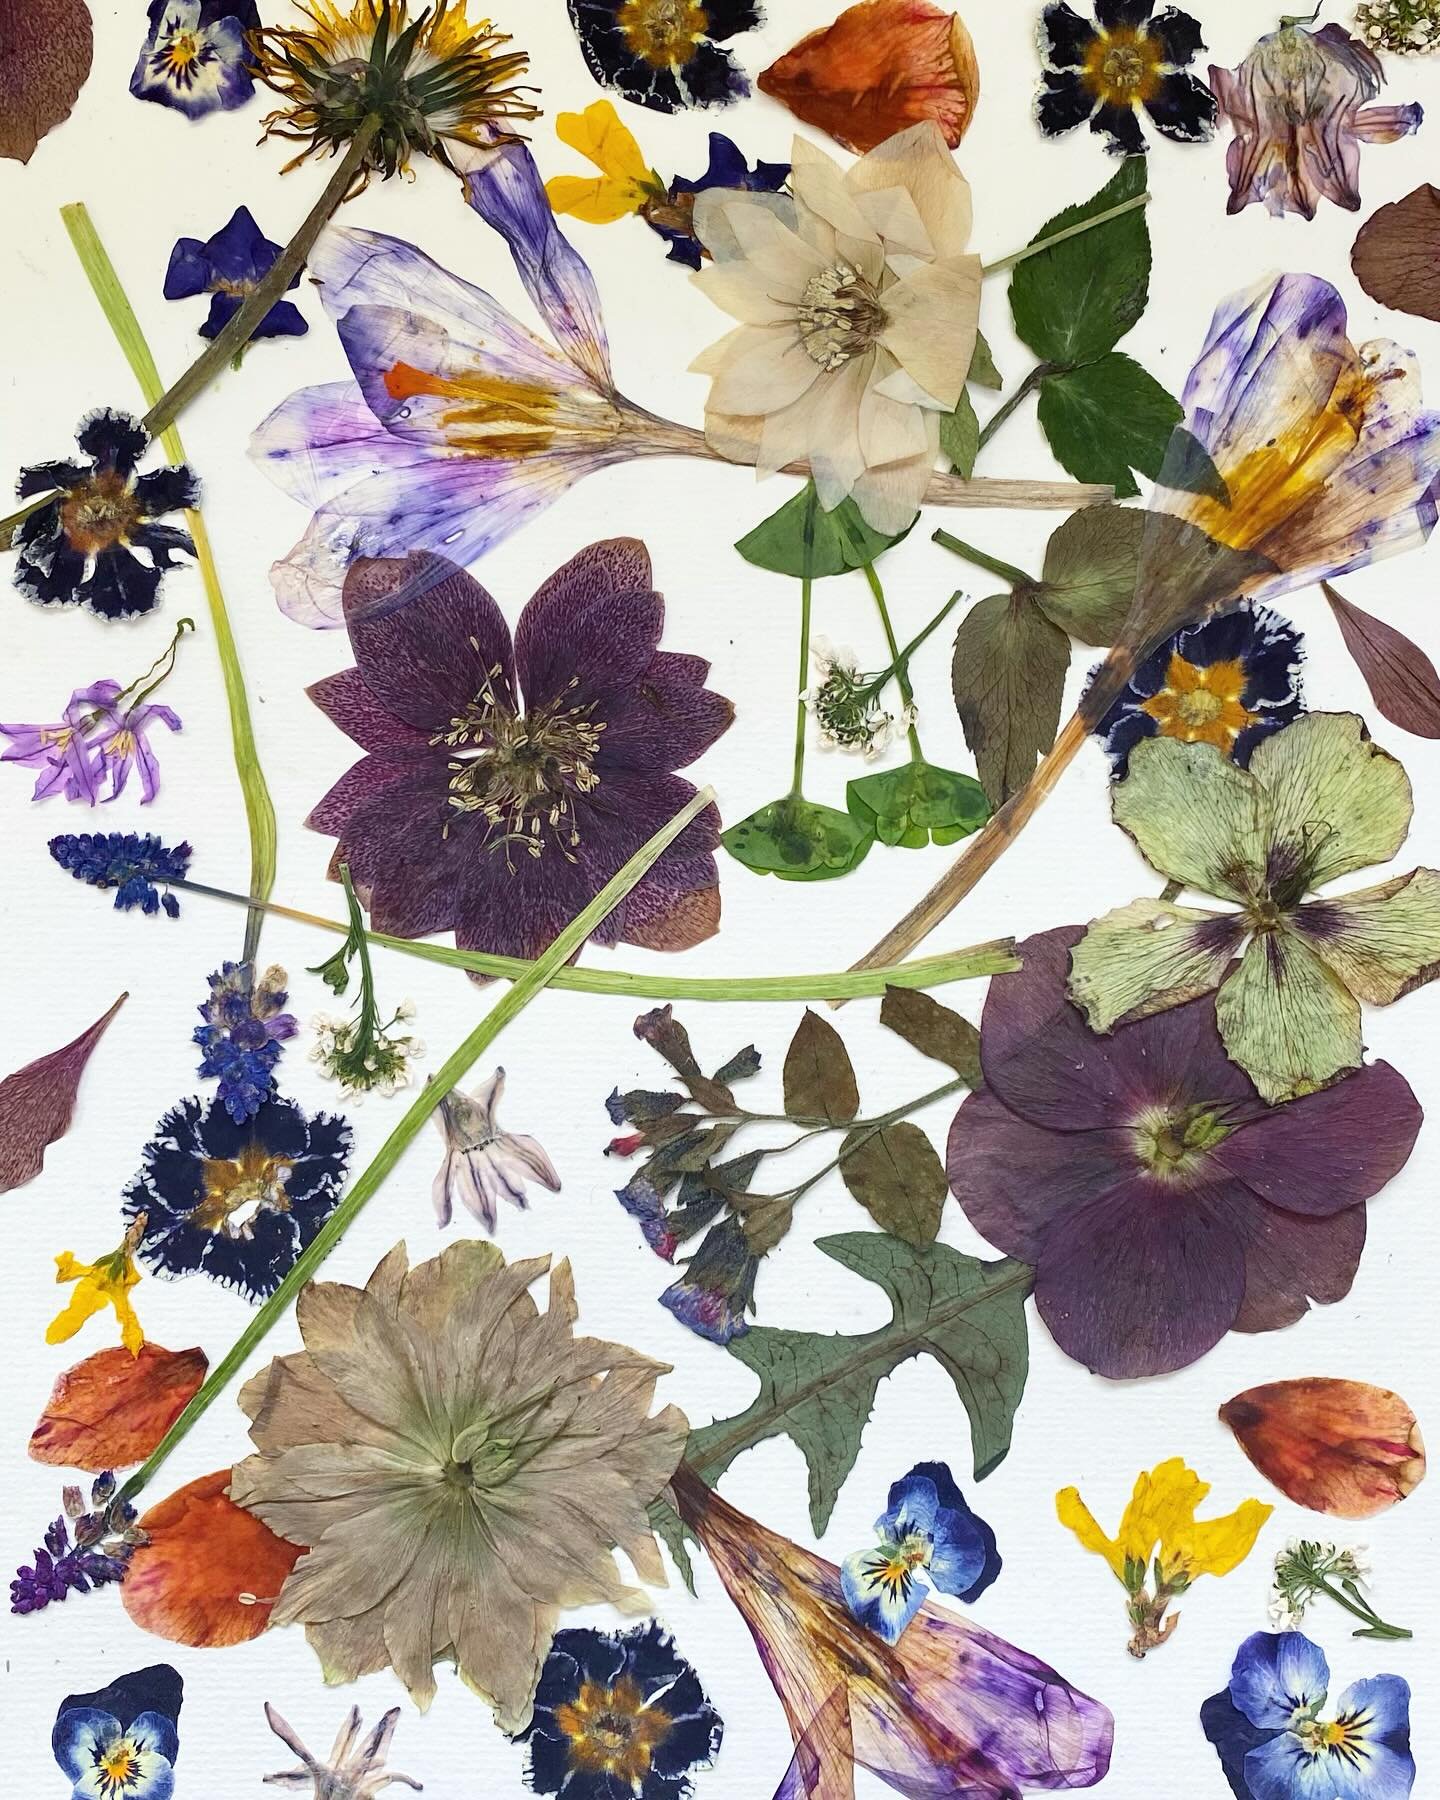 How many of these do you know the names of?
Early Spring pressed flowers.